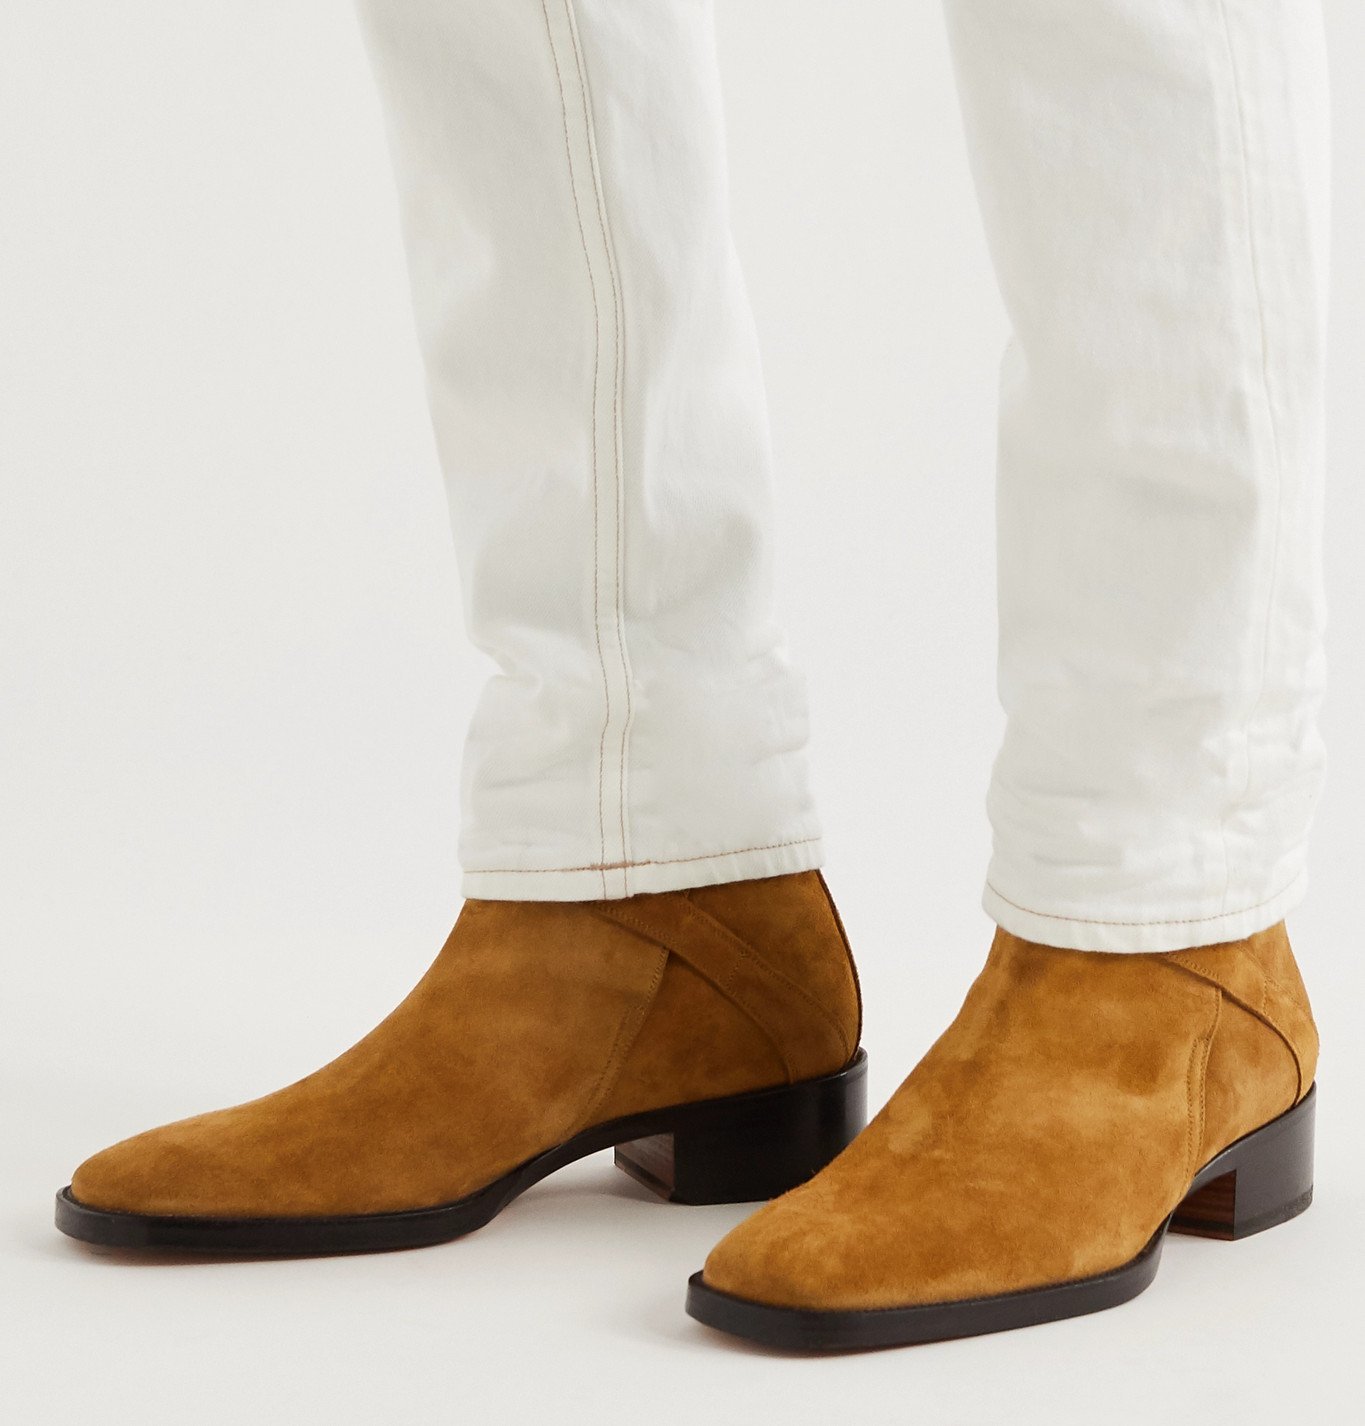 TOM FORD - Rochester Suede Chelsea Boots - Brown TOM FORD